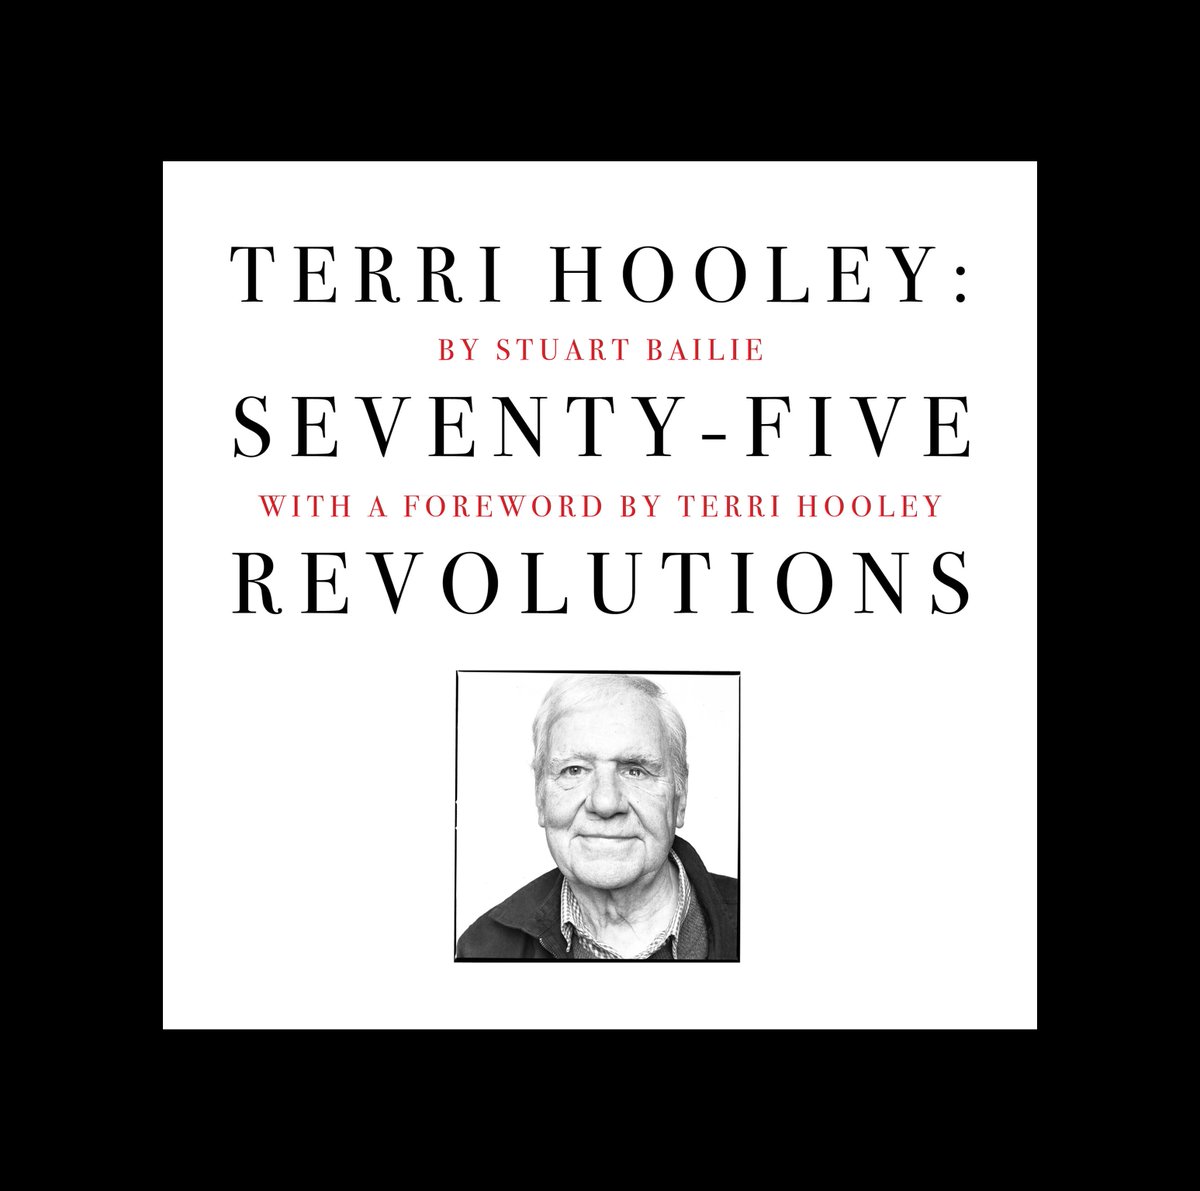 'Terri Hooley: 75 Revolutions', my new book. An astonishing life at a milestone birthday. Music, Good Vibrations, Belfast, punk rock, conflict & attitude. 144 pages plus over 100 images, many unseen. Interviews, insights with a foreword from Terri. See my bio for all the info.